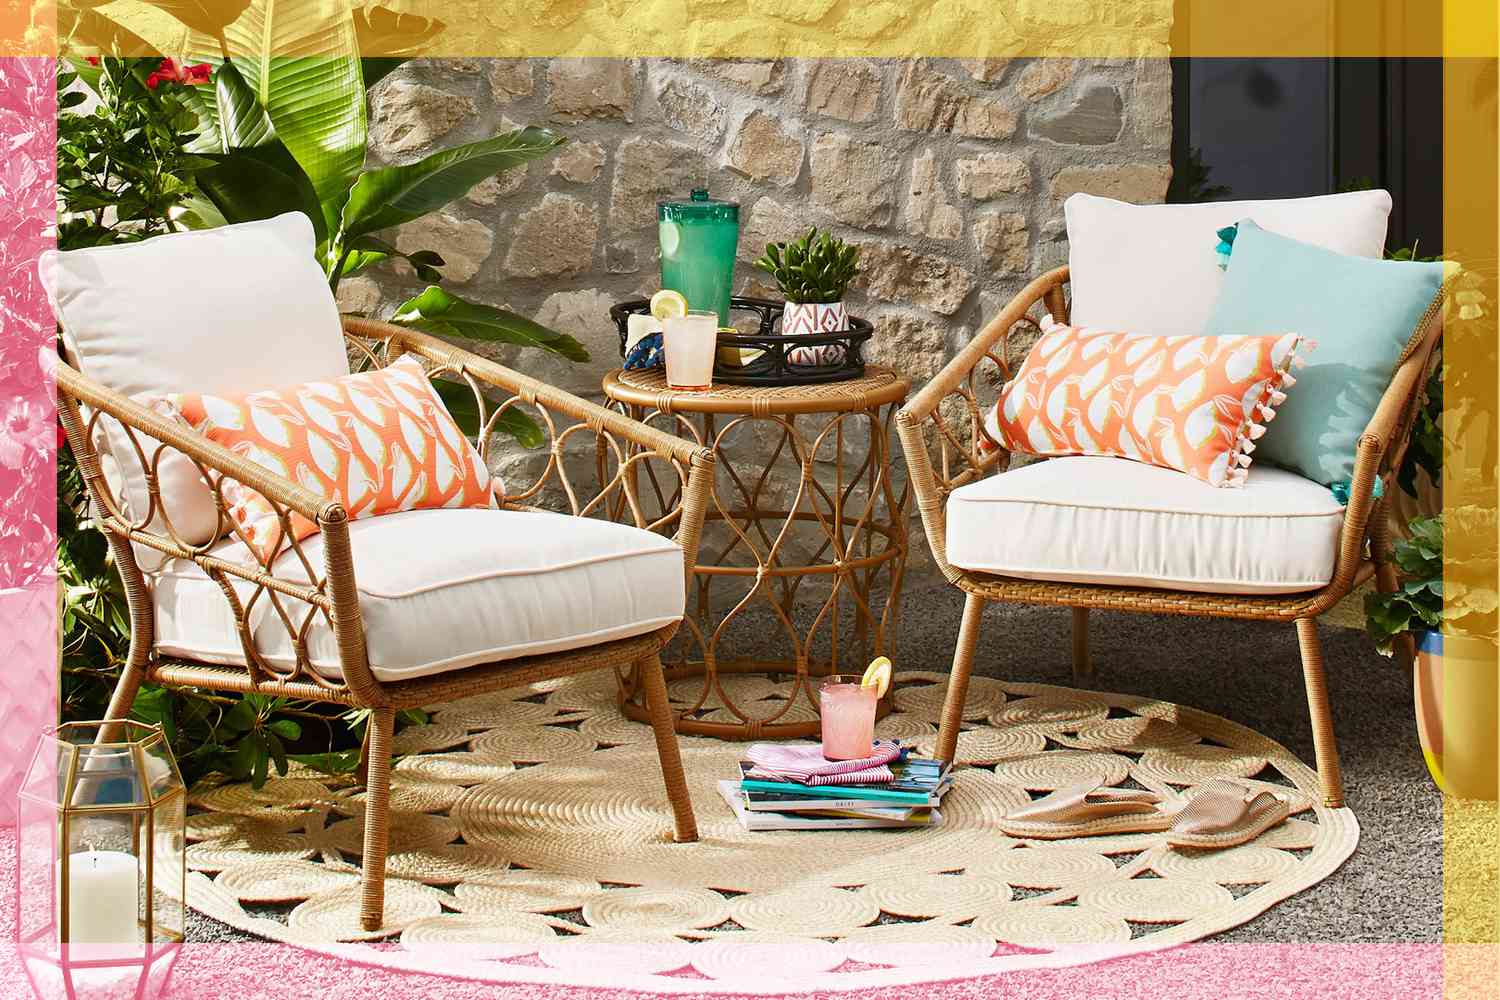 Outdoor Furniture and Decor from Target